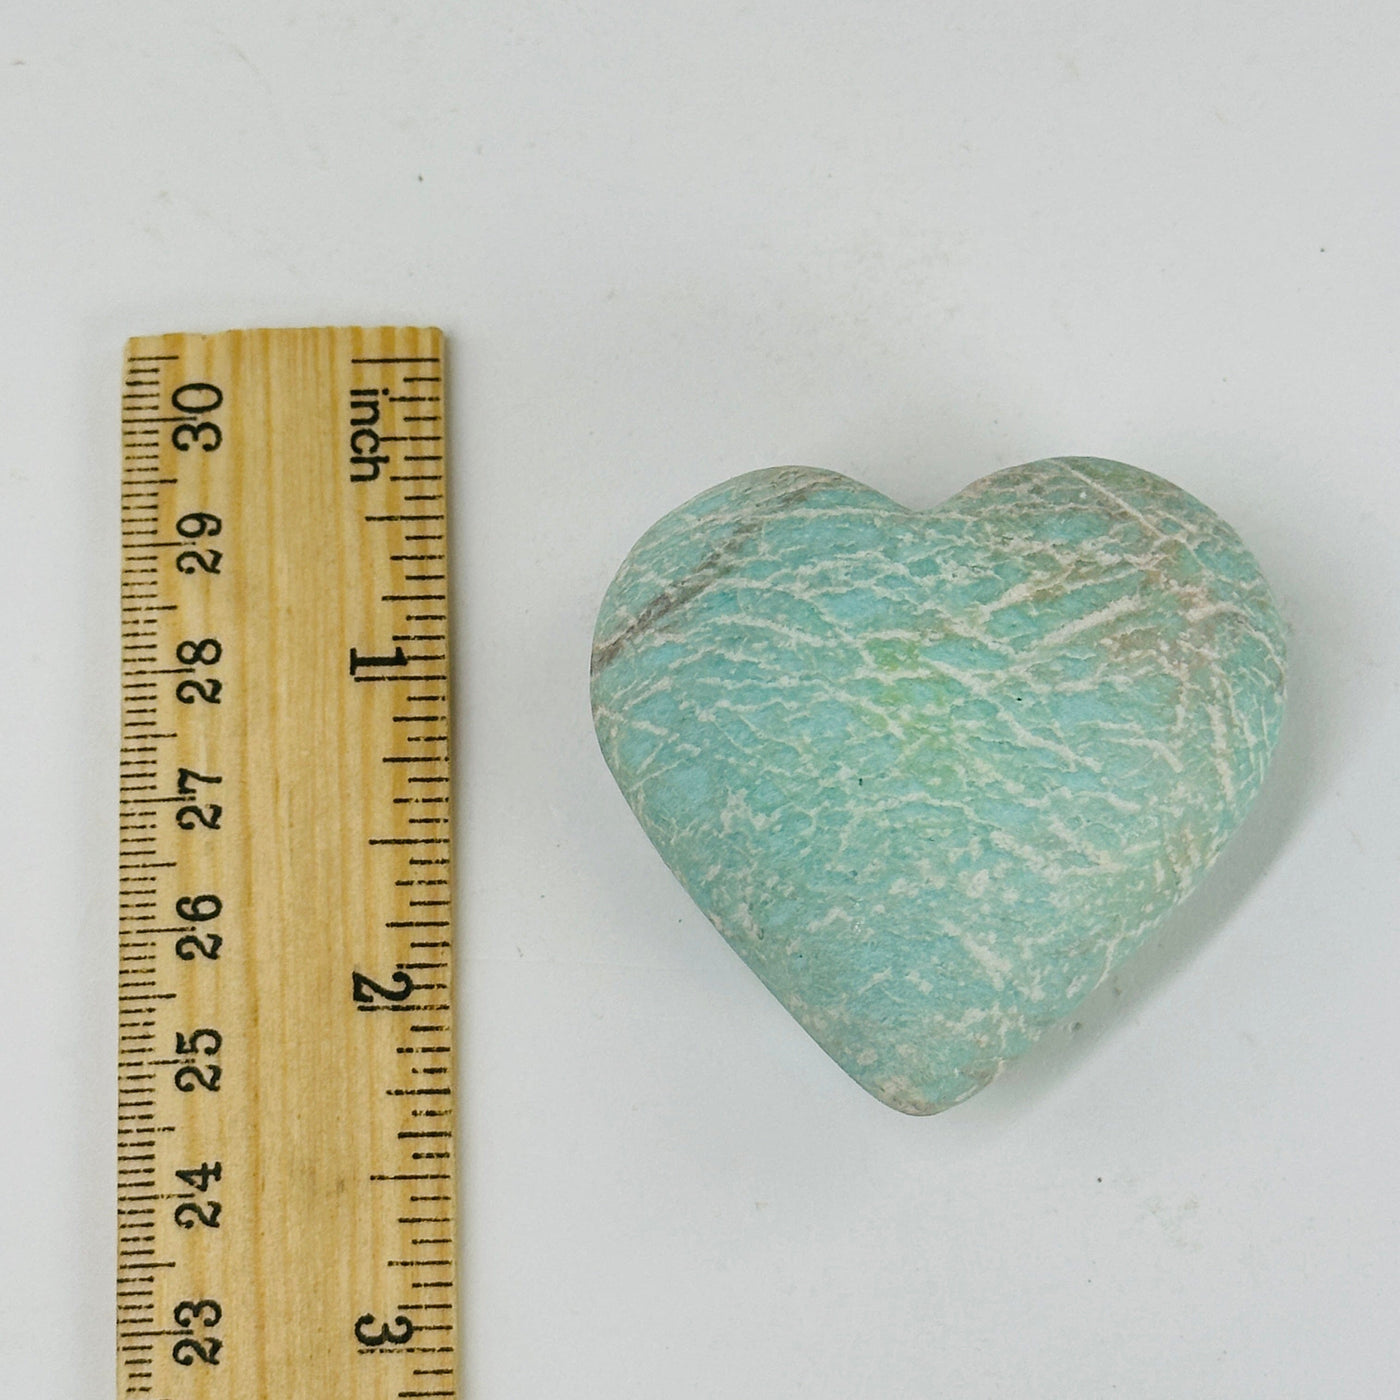 blue aragonite heart with decorations in the background